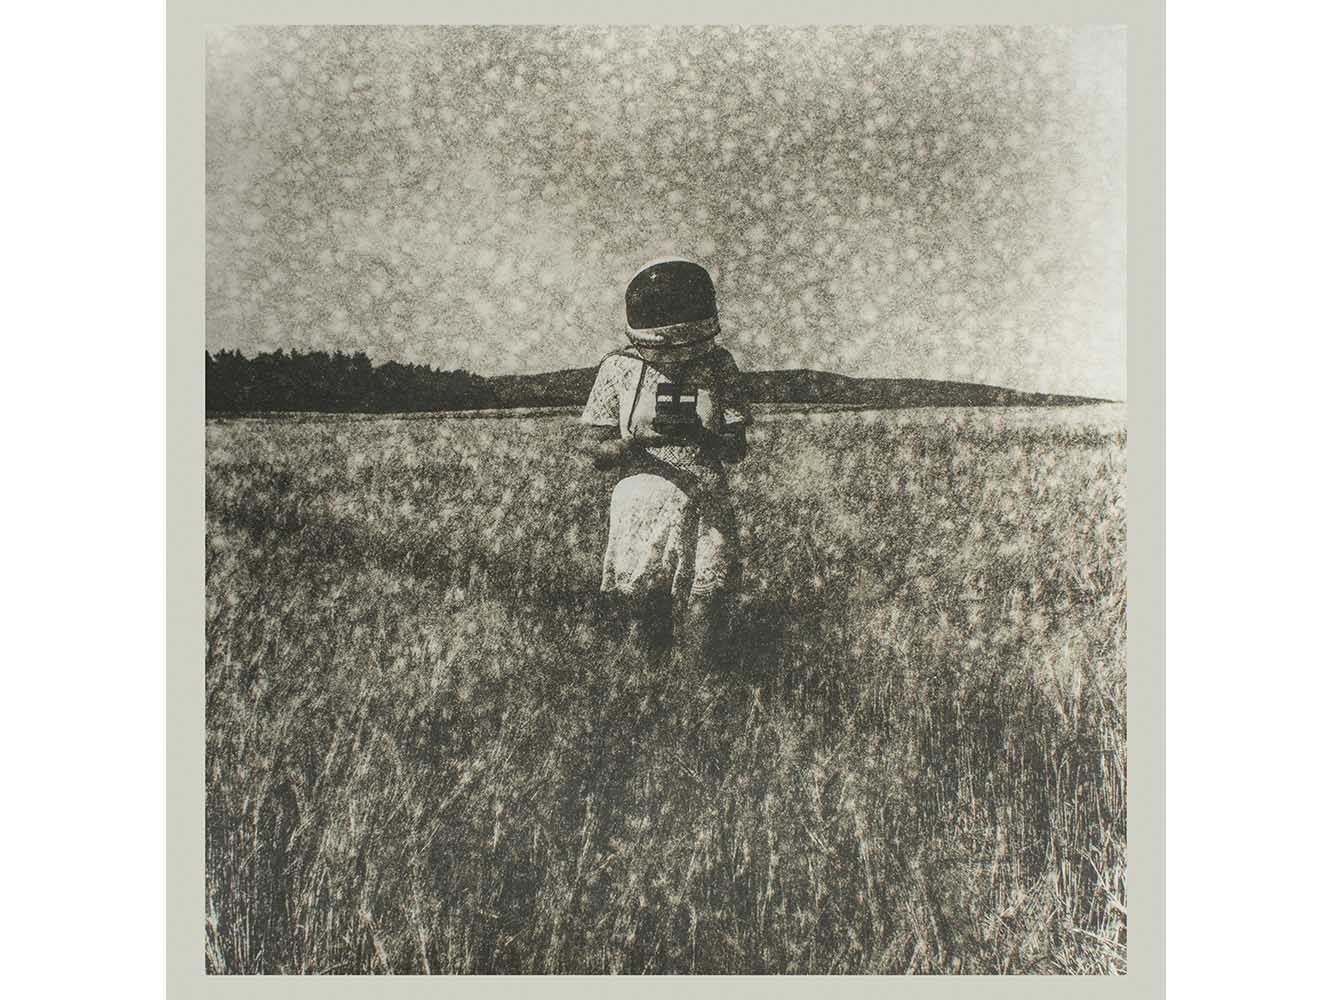 Black and white photograph of person in space helmet in a field